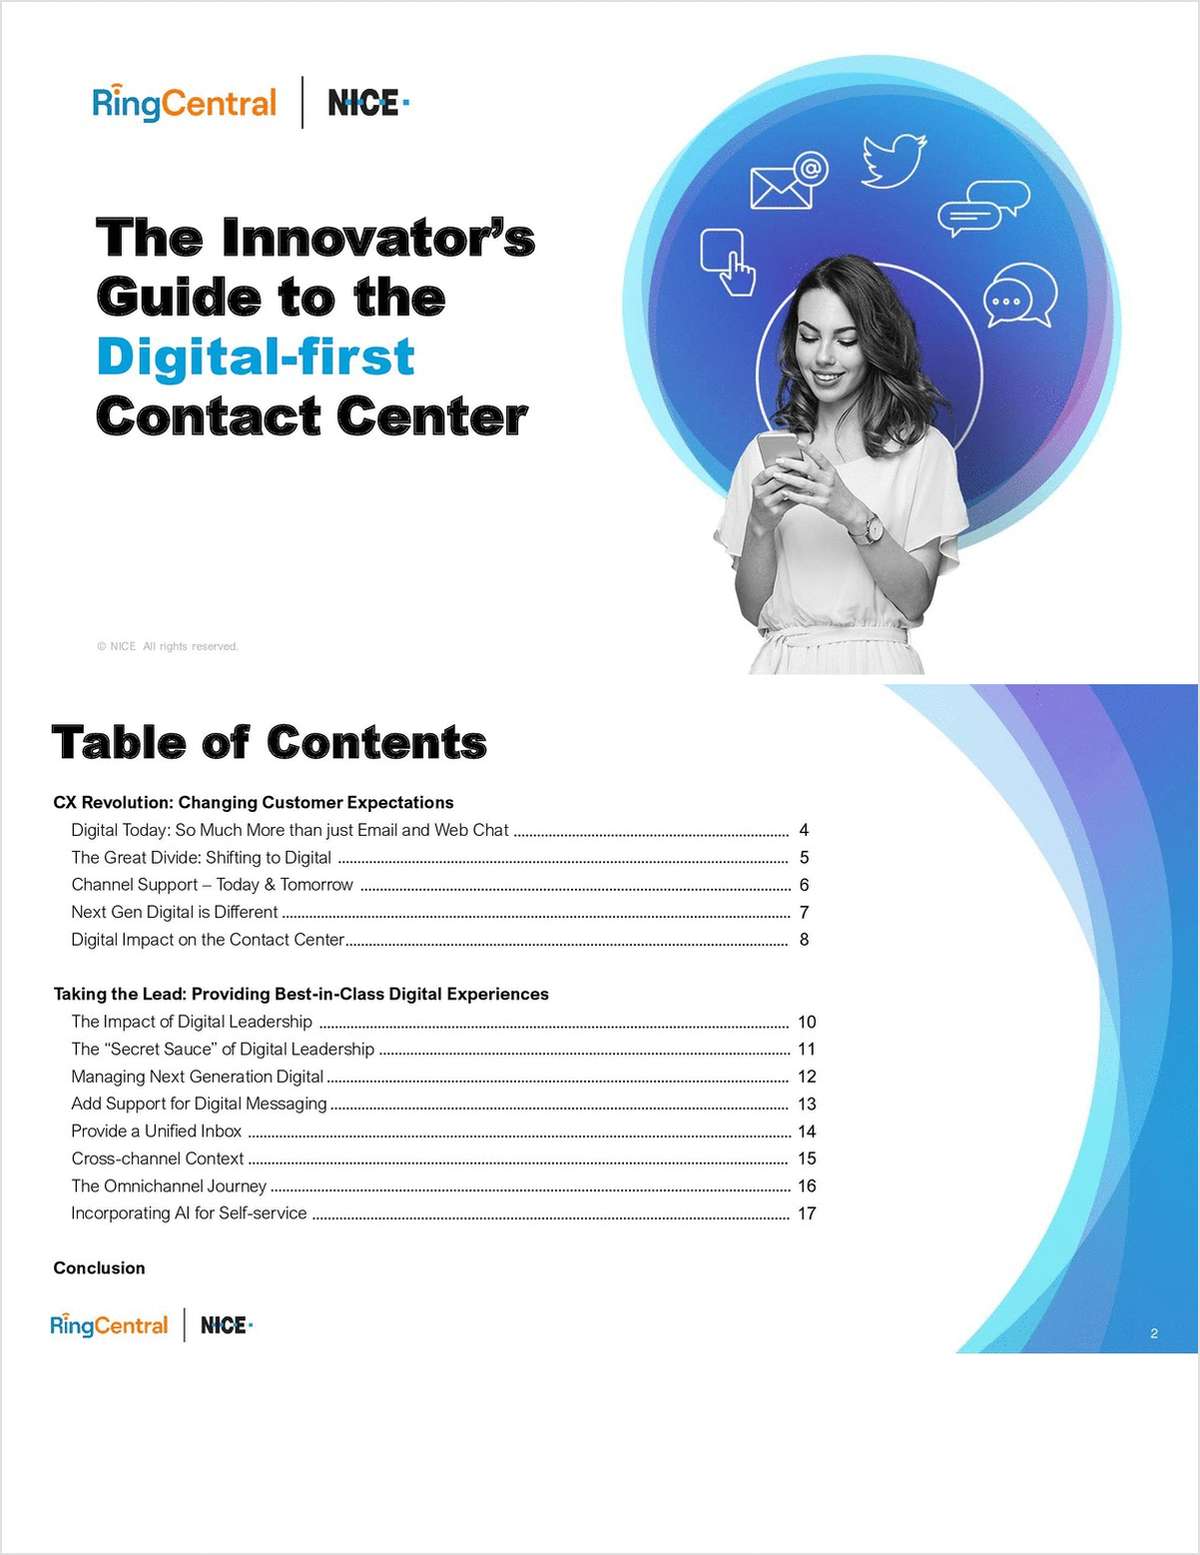 The Innovator's Guide to the Digital-first Contact Center